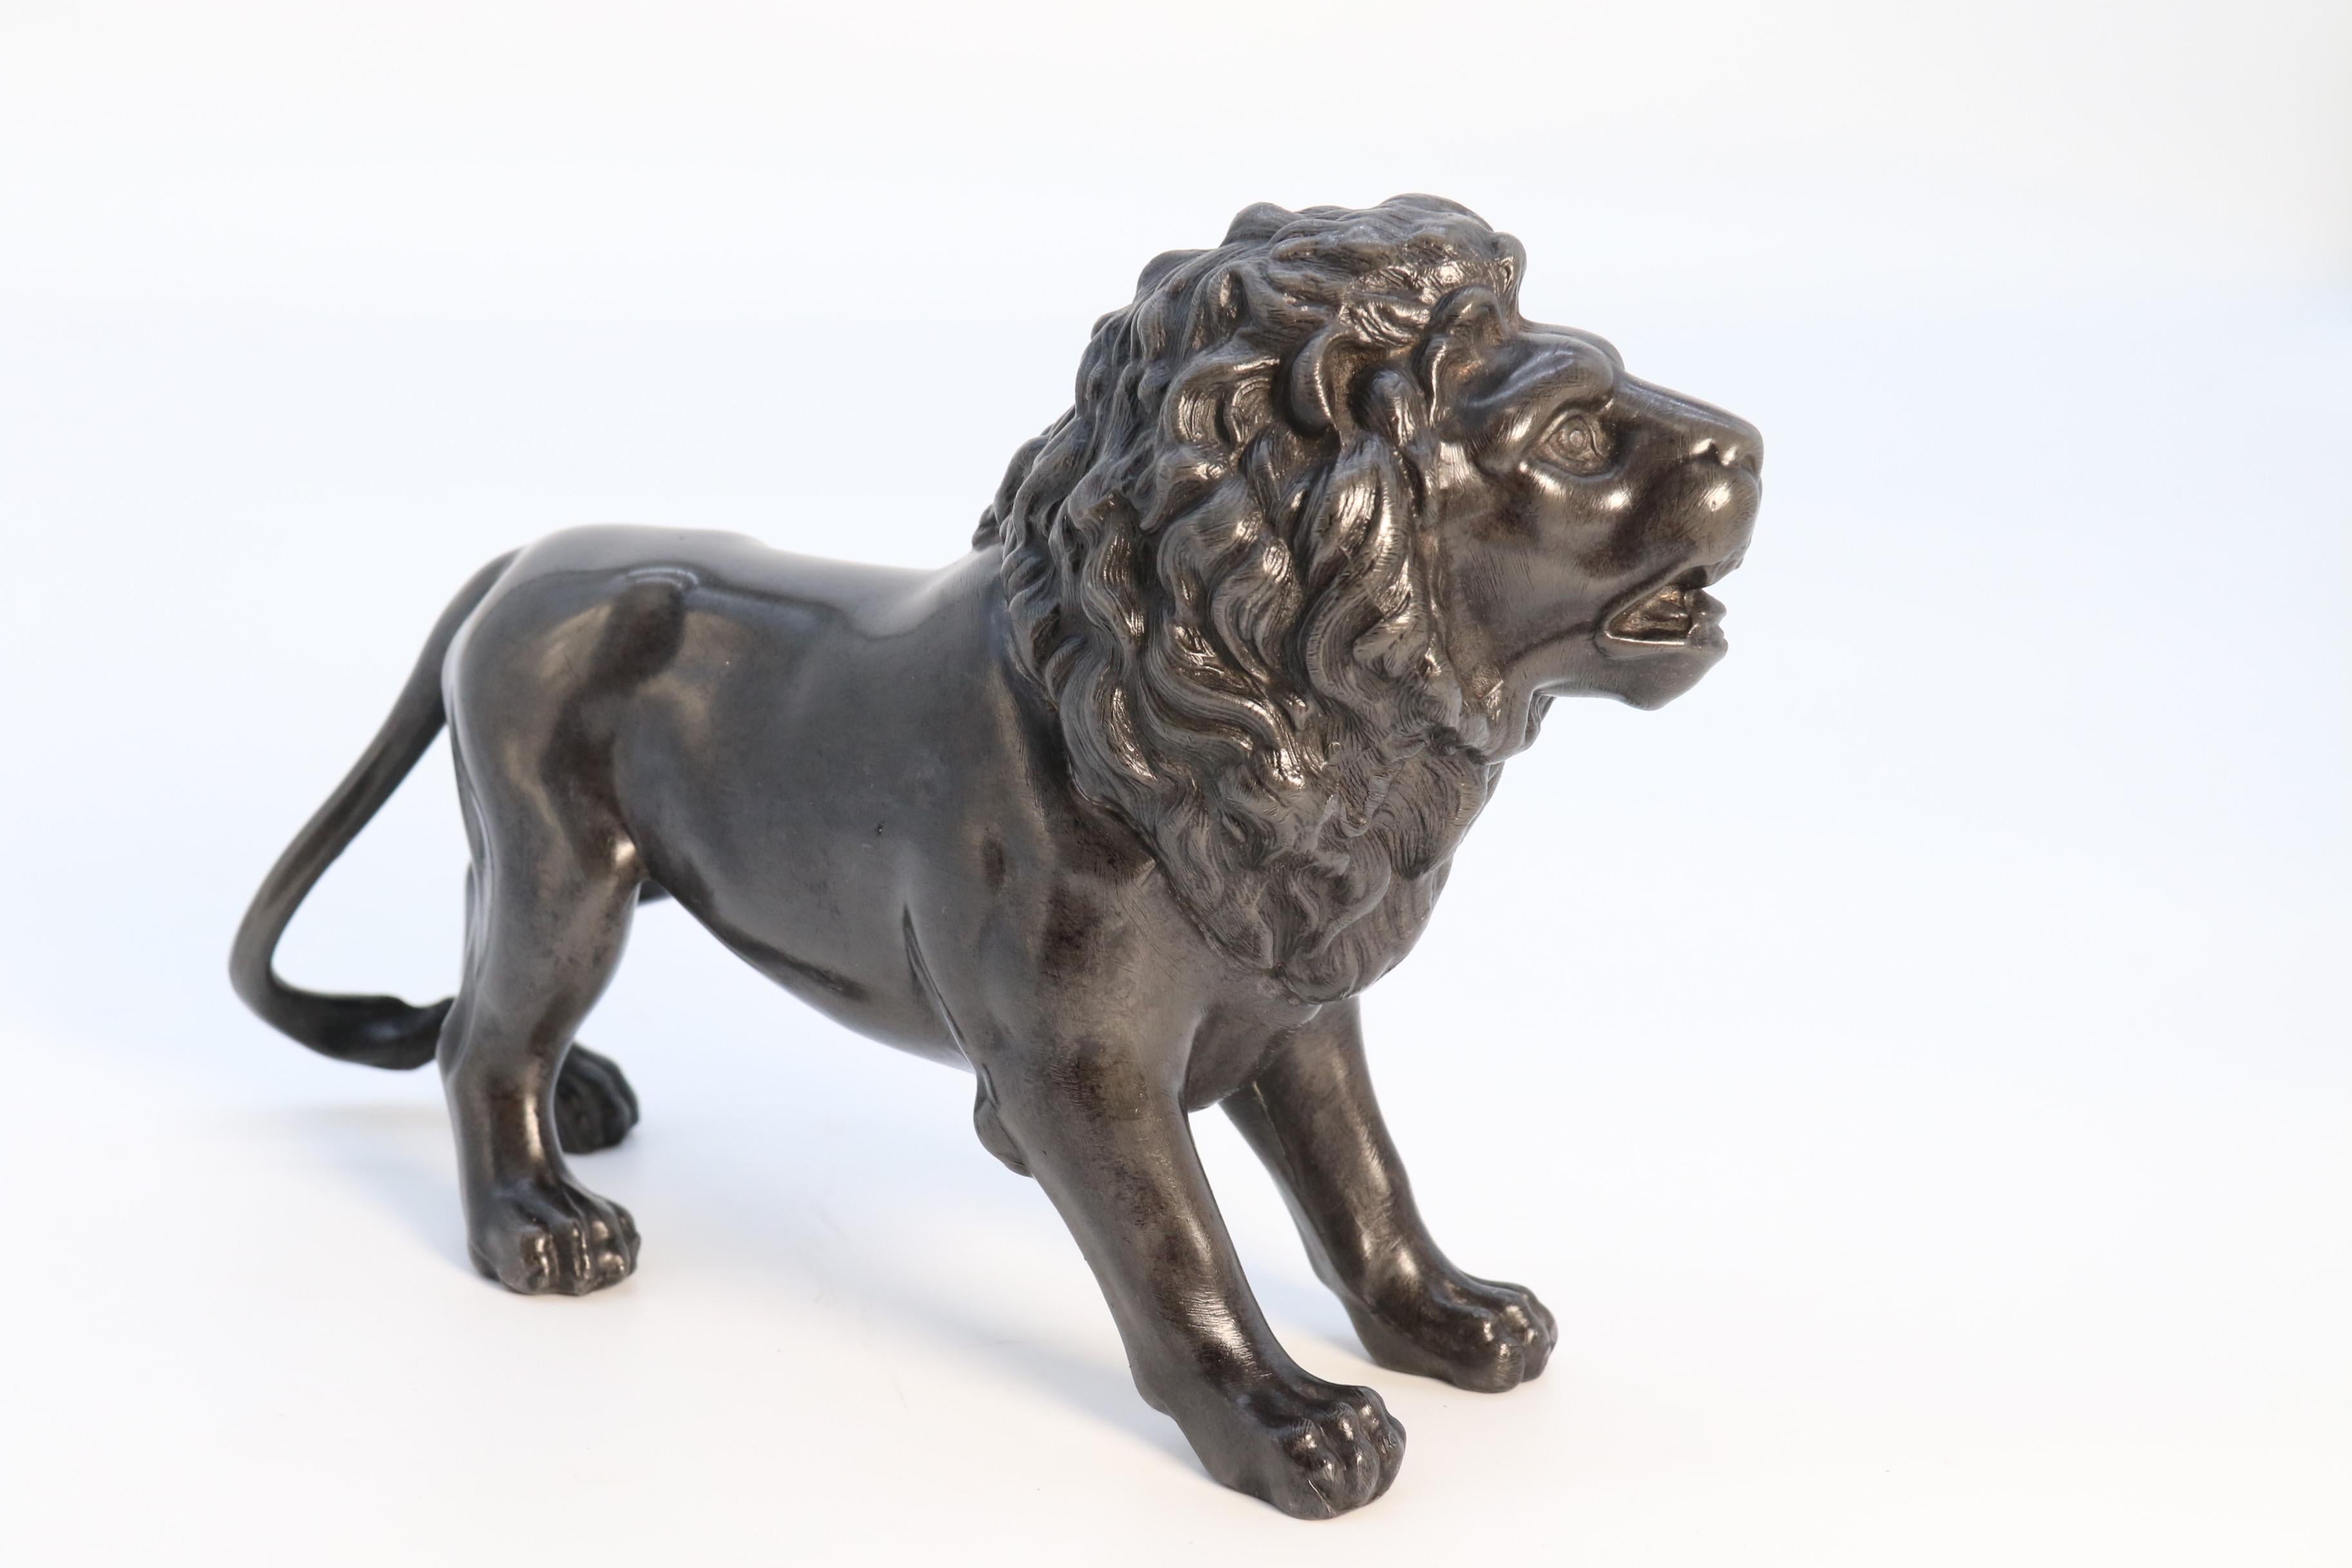 
This rare English pewter study depicts a muscular and handsome male lion. It has been produced with good scale and proportion and is well detailed, particularly to the head, mane and paws. The pewter has a pleasing dark colour with nice patination